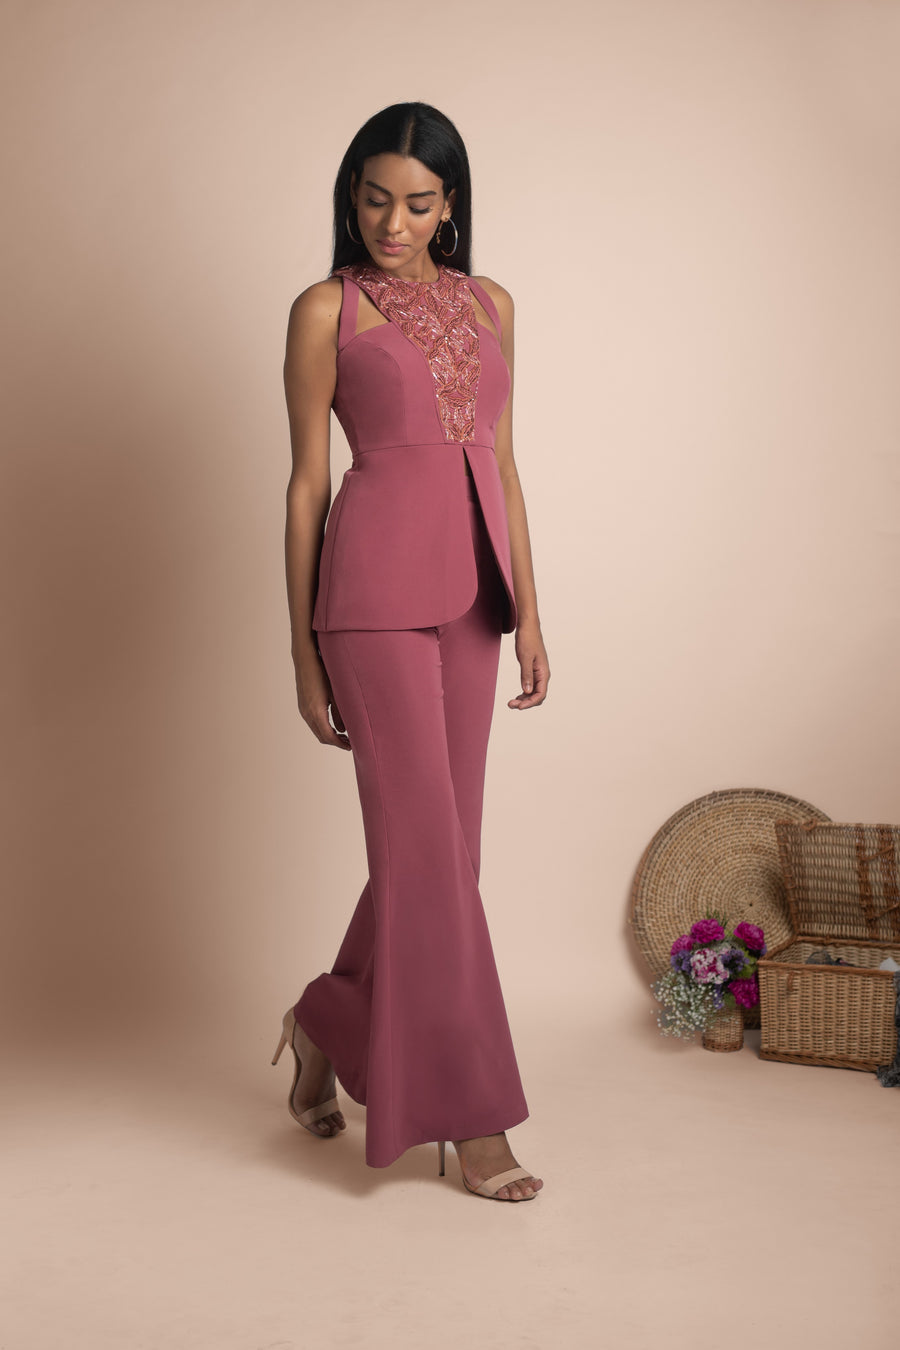 Mehak Murpana | Embroidered Pantsuit | Stylish formal and party wear.